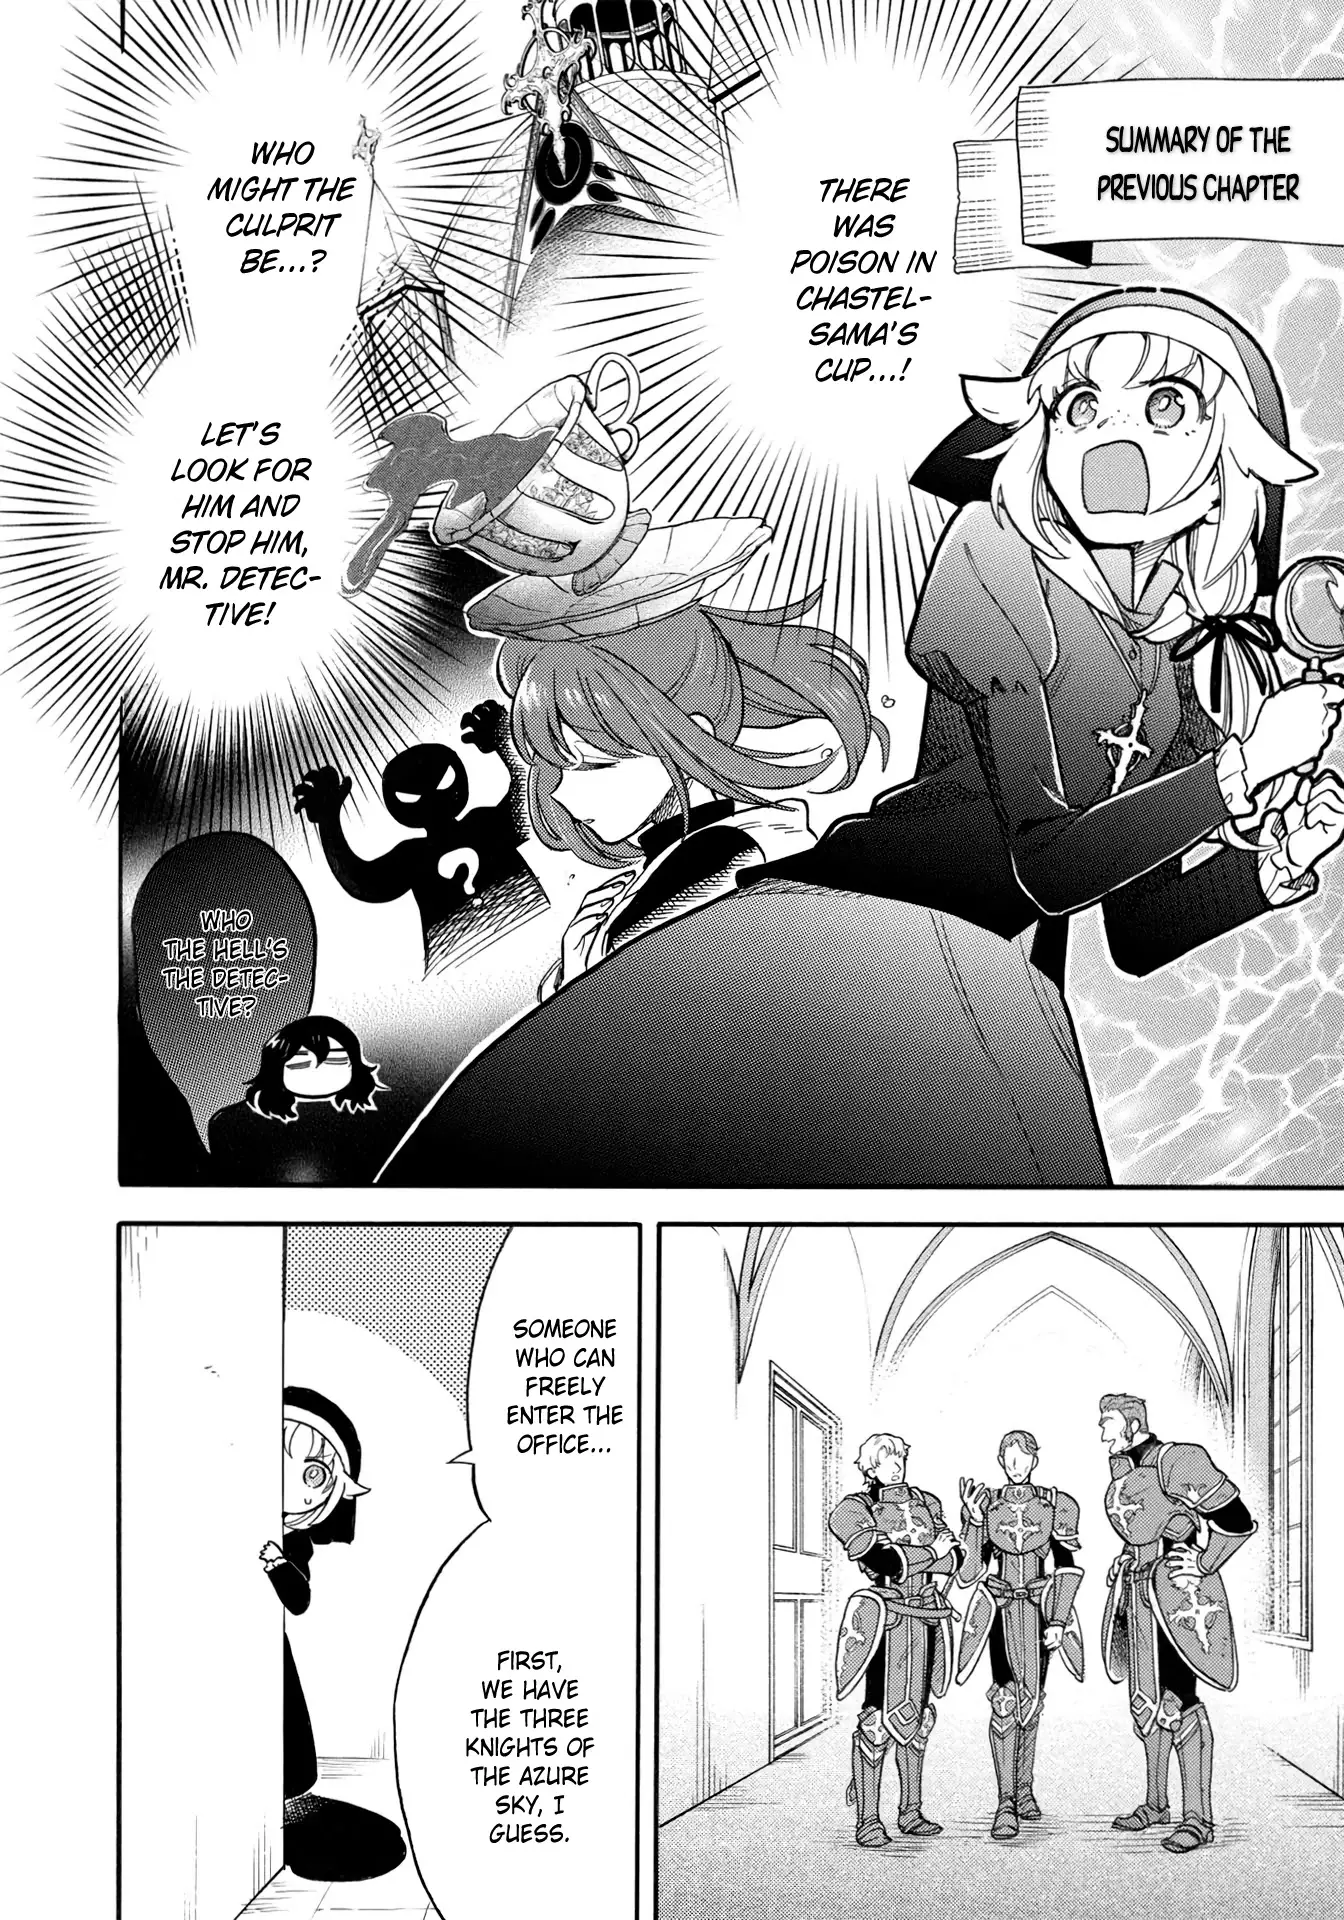 A Villain's Dilemma: How To Not Meddle Too Much With A Clumsy Holy Knight's Life - 4 page 3-063bfff6